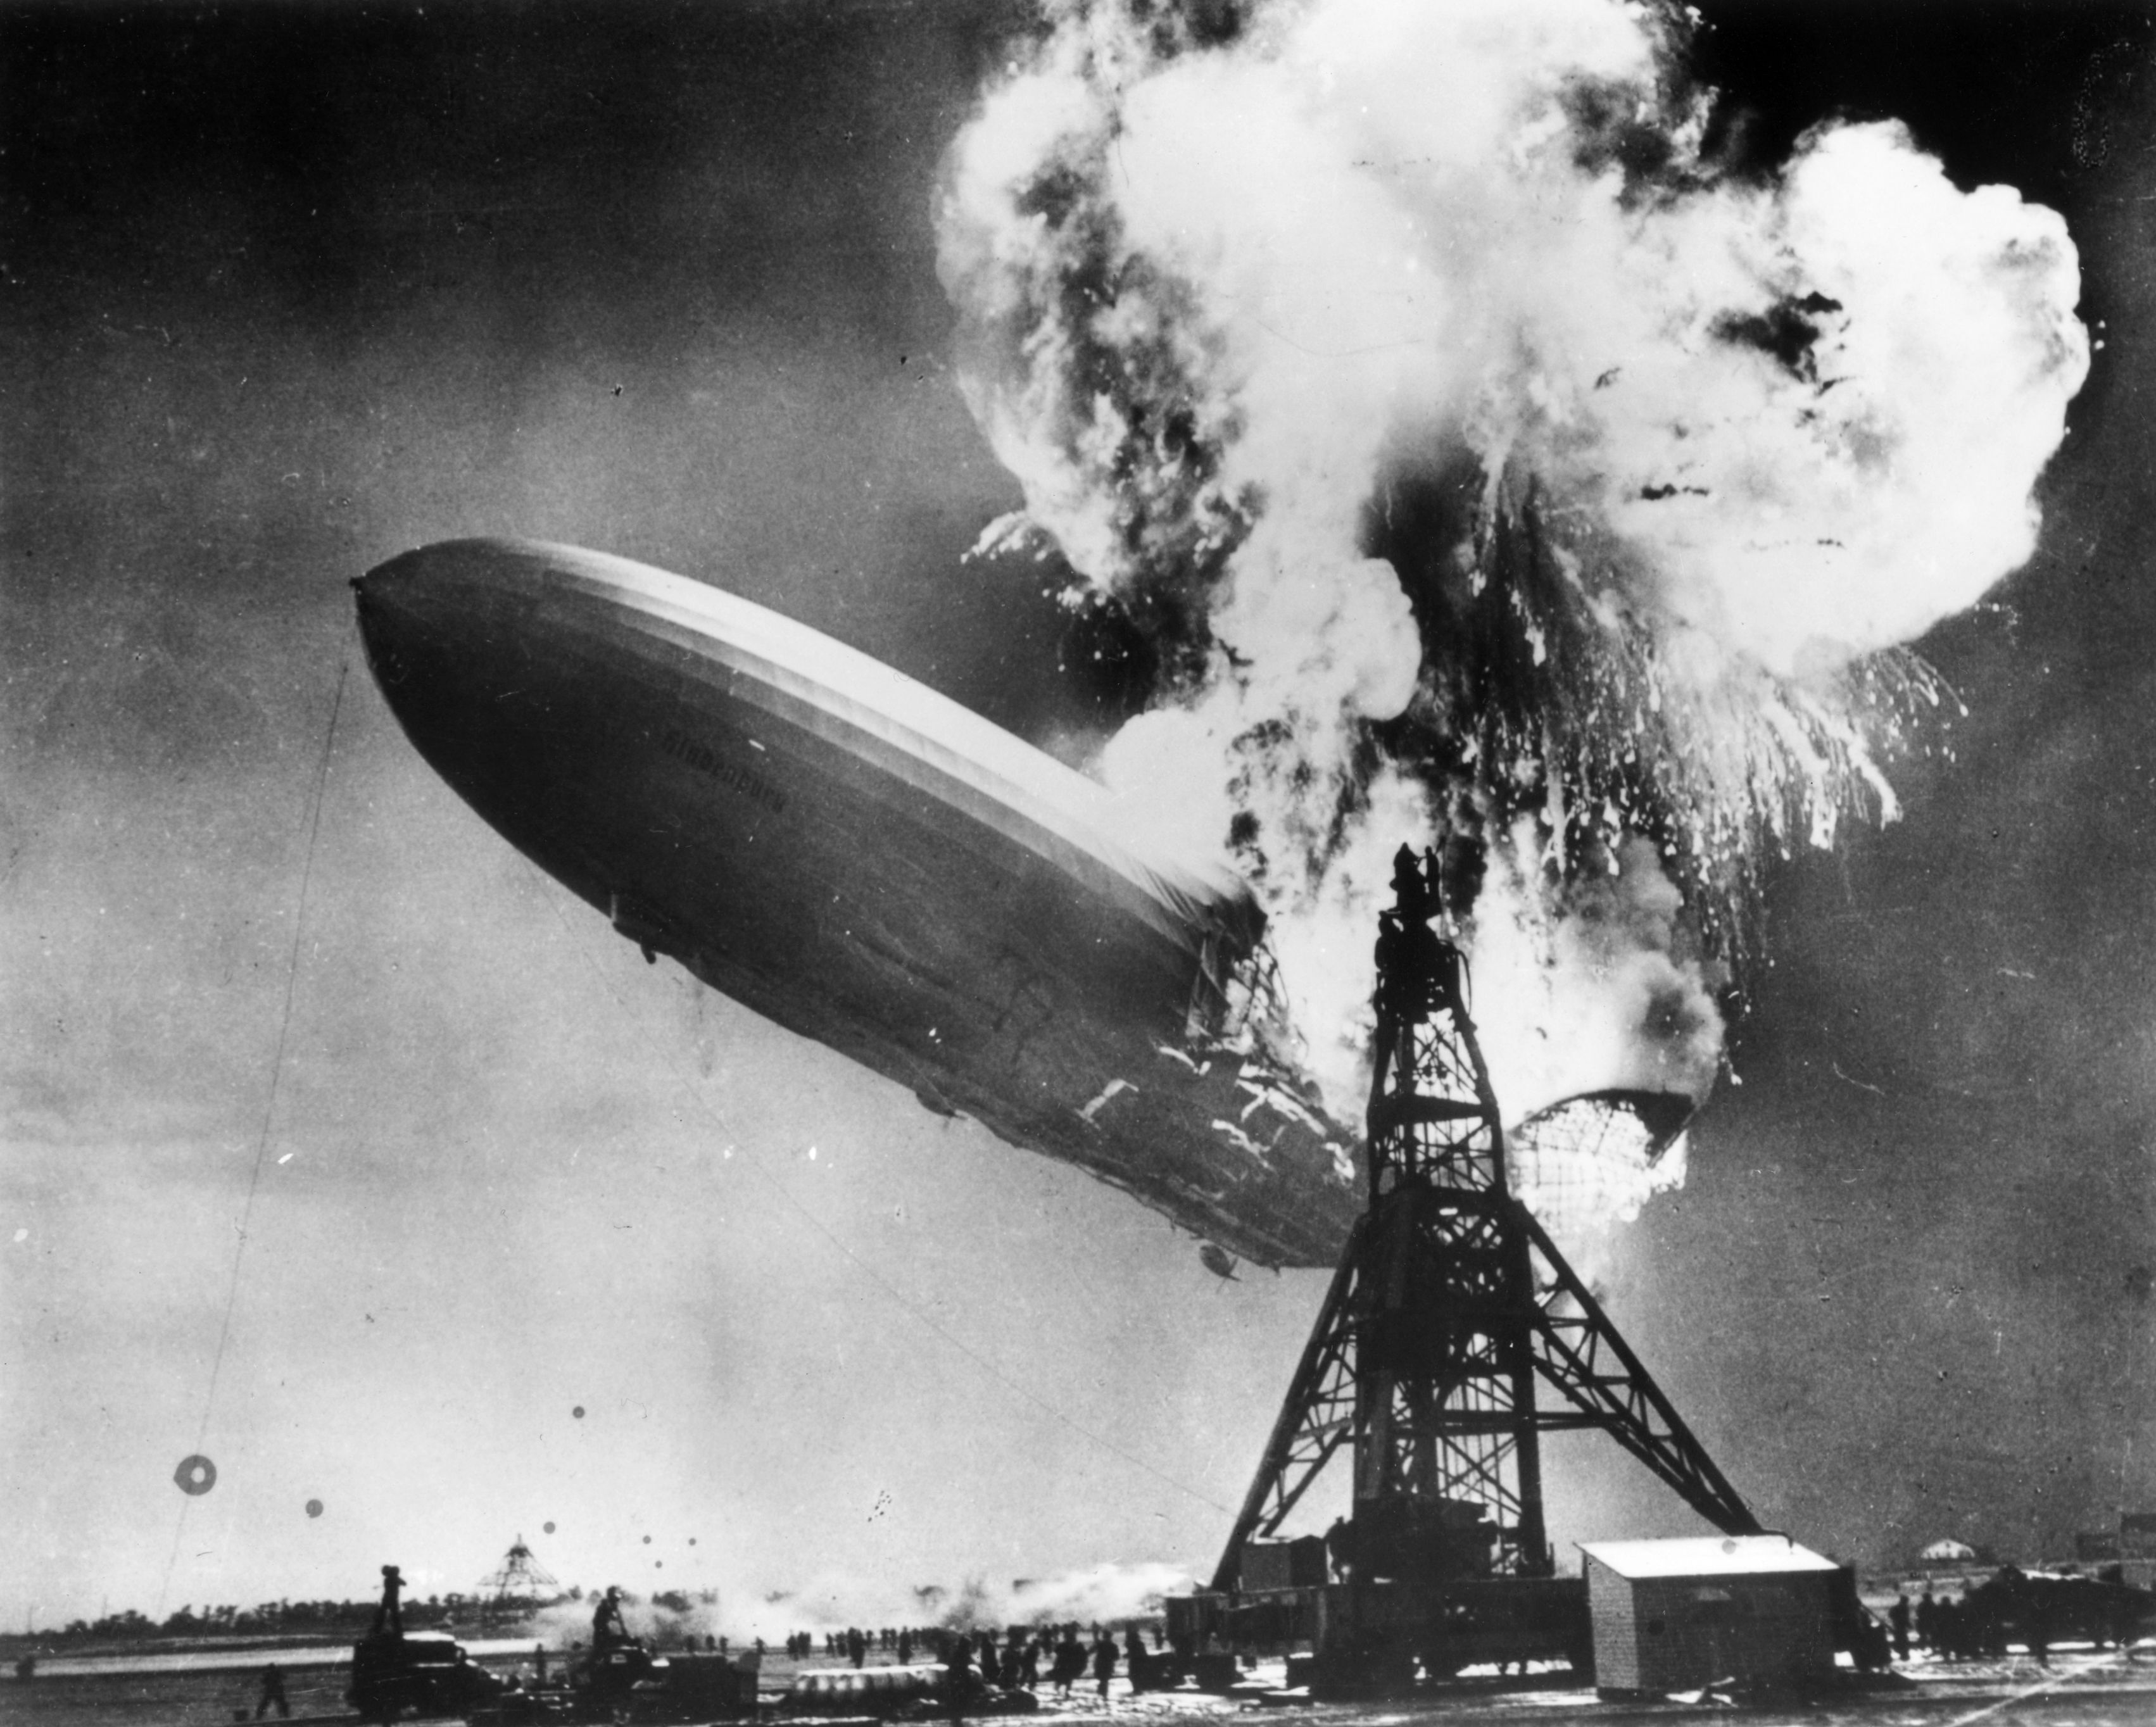 The Hindenburg Disaster - Sam Shere was one of nearly two dozen photographers who scrambled to document the crash of the Hindenburg Zeppelin that killed 36 people on May 6, 1937. But it’s his image, with its grandeur and palpable terror, that has endured over the other photographs. Published on front pages around the world and used on the cover of a Led Zeppelin album decades later, the disaster and the press coverage surrounding it brought the golden age of the airships to a definitive end.